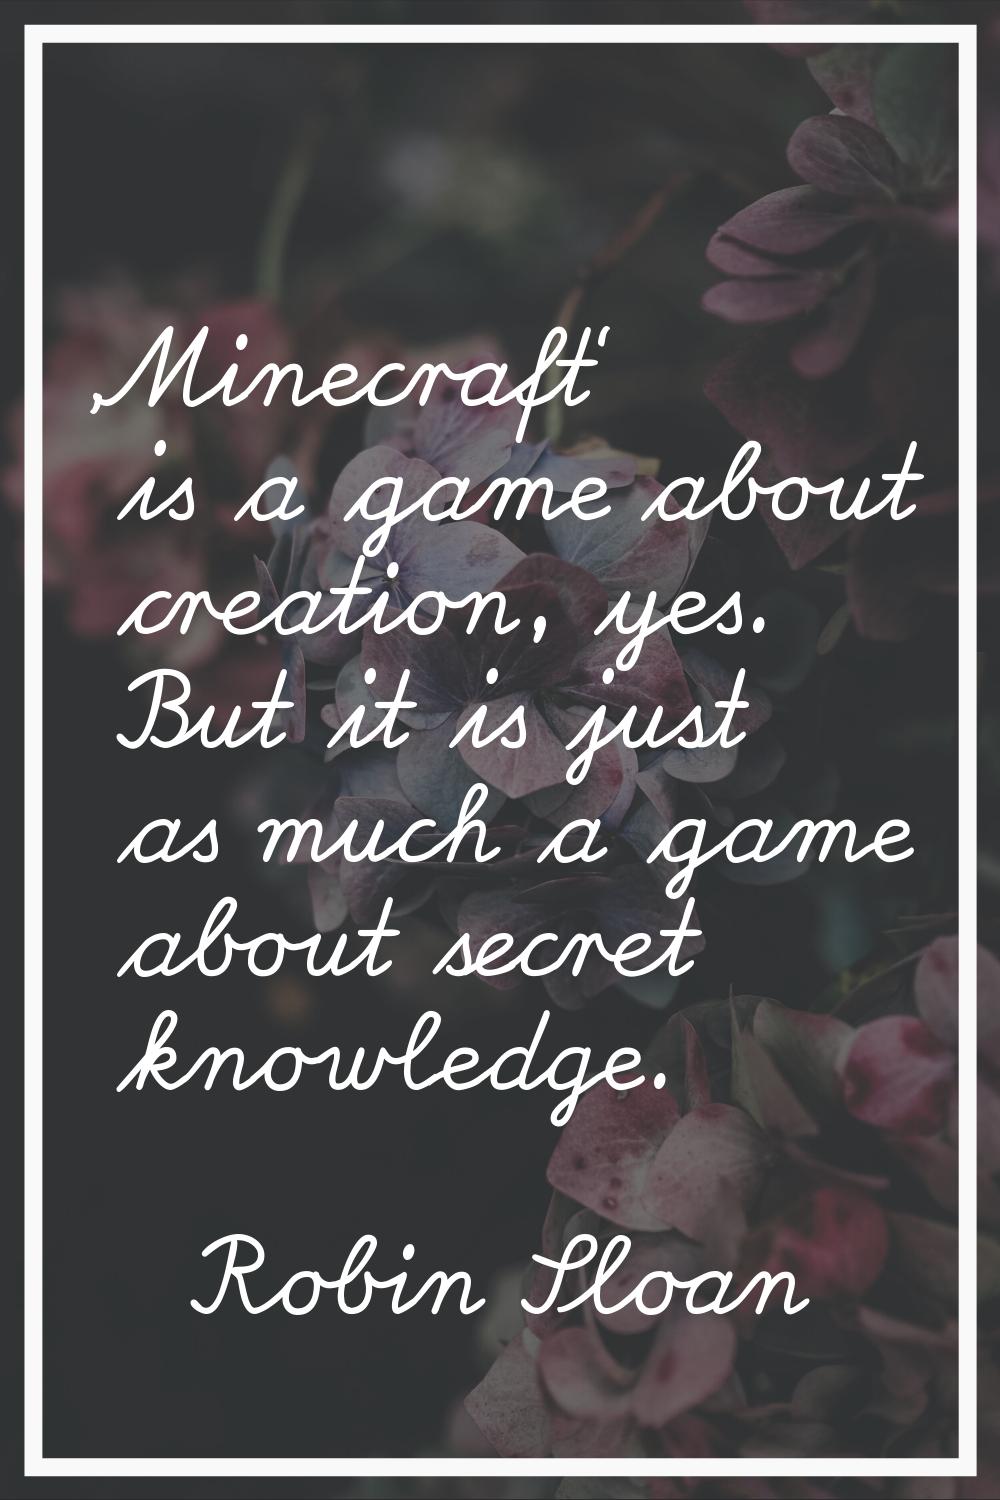 'Minecraft' is a game about creation, yes. But it is just as much a game about secret knowledge.